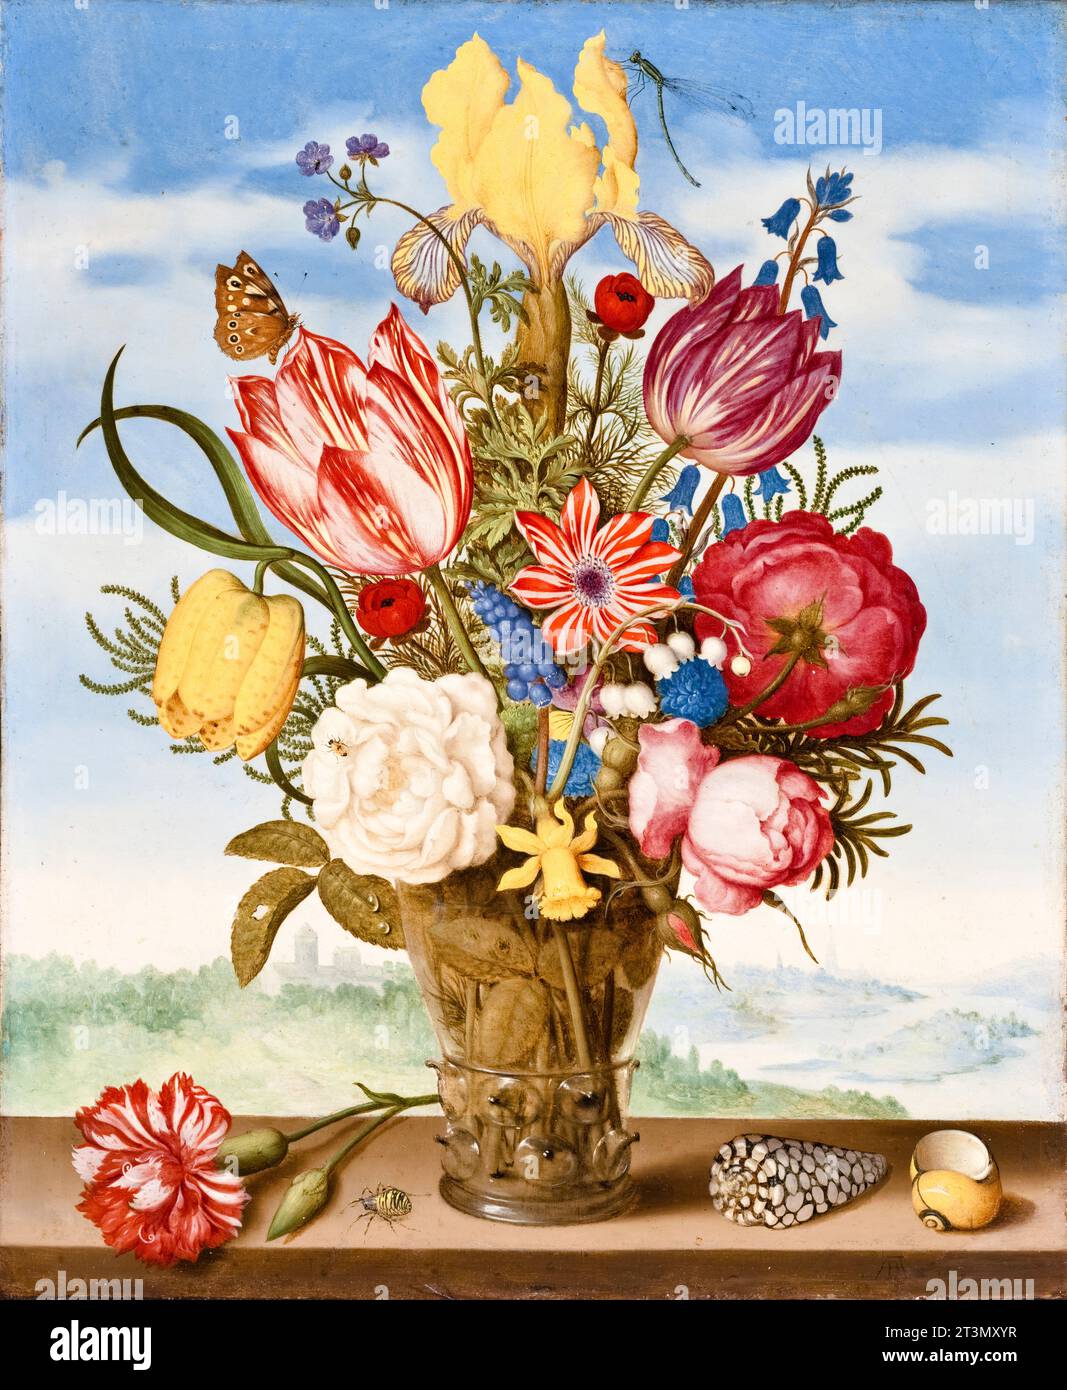 Ambrosius Bosschaert, Bouquet of Flowers on a Ledge, still life painting in oil on copper, 1619 Stock Photo